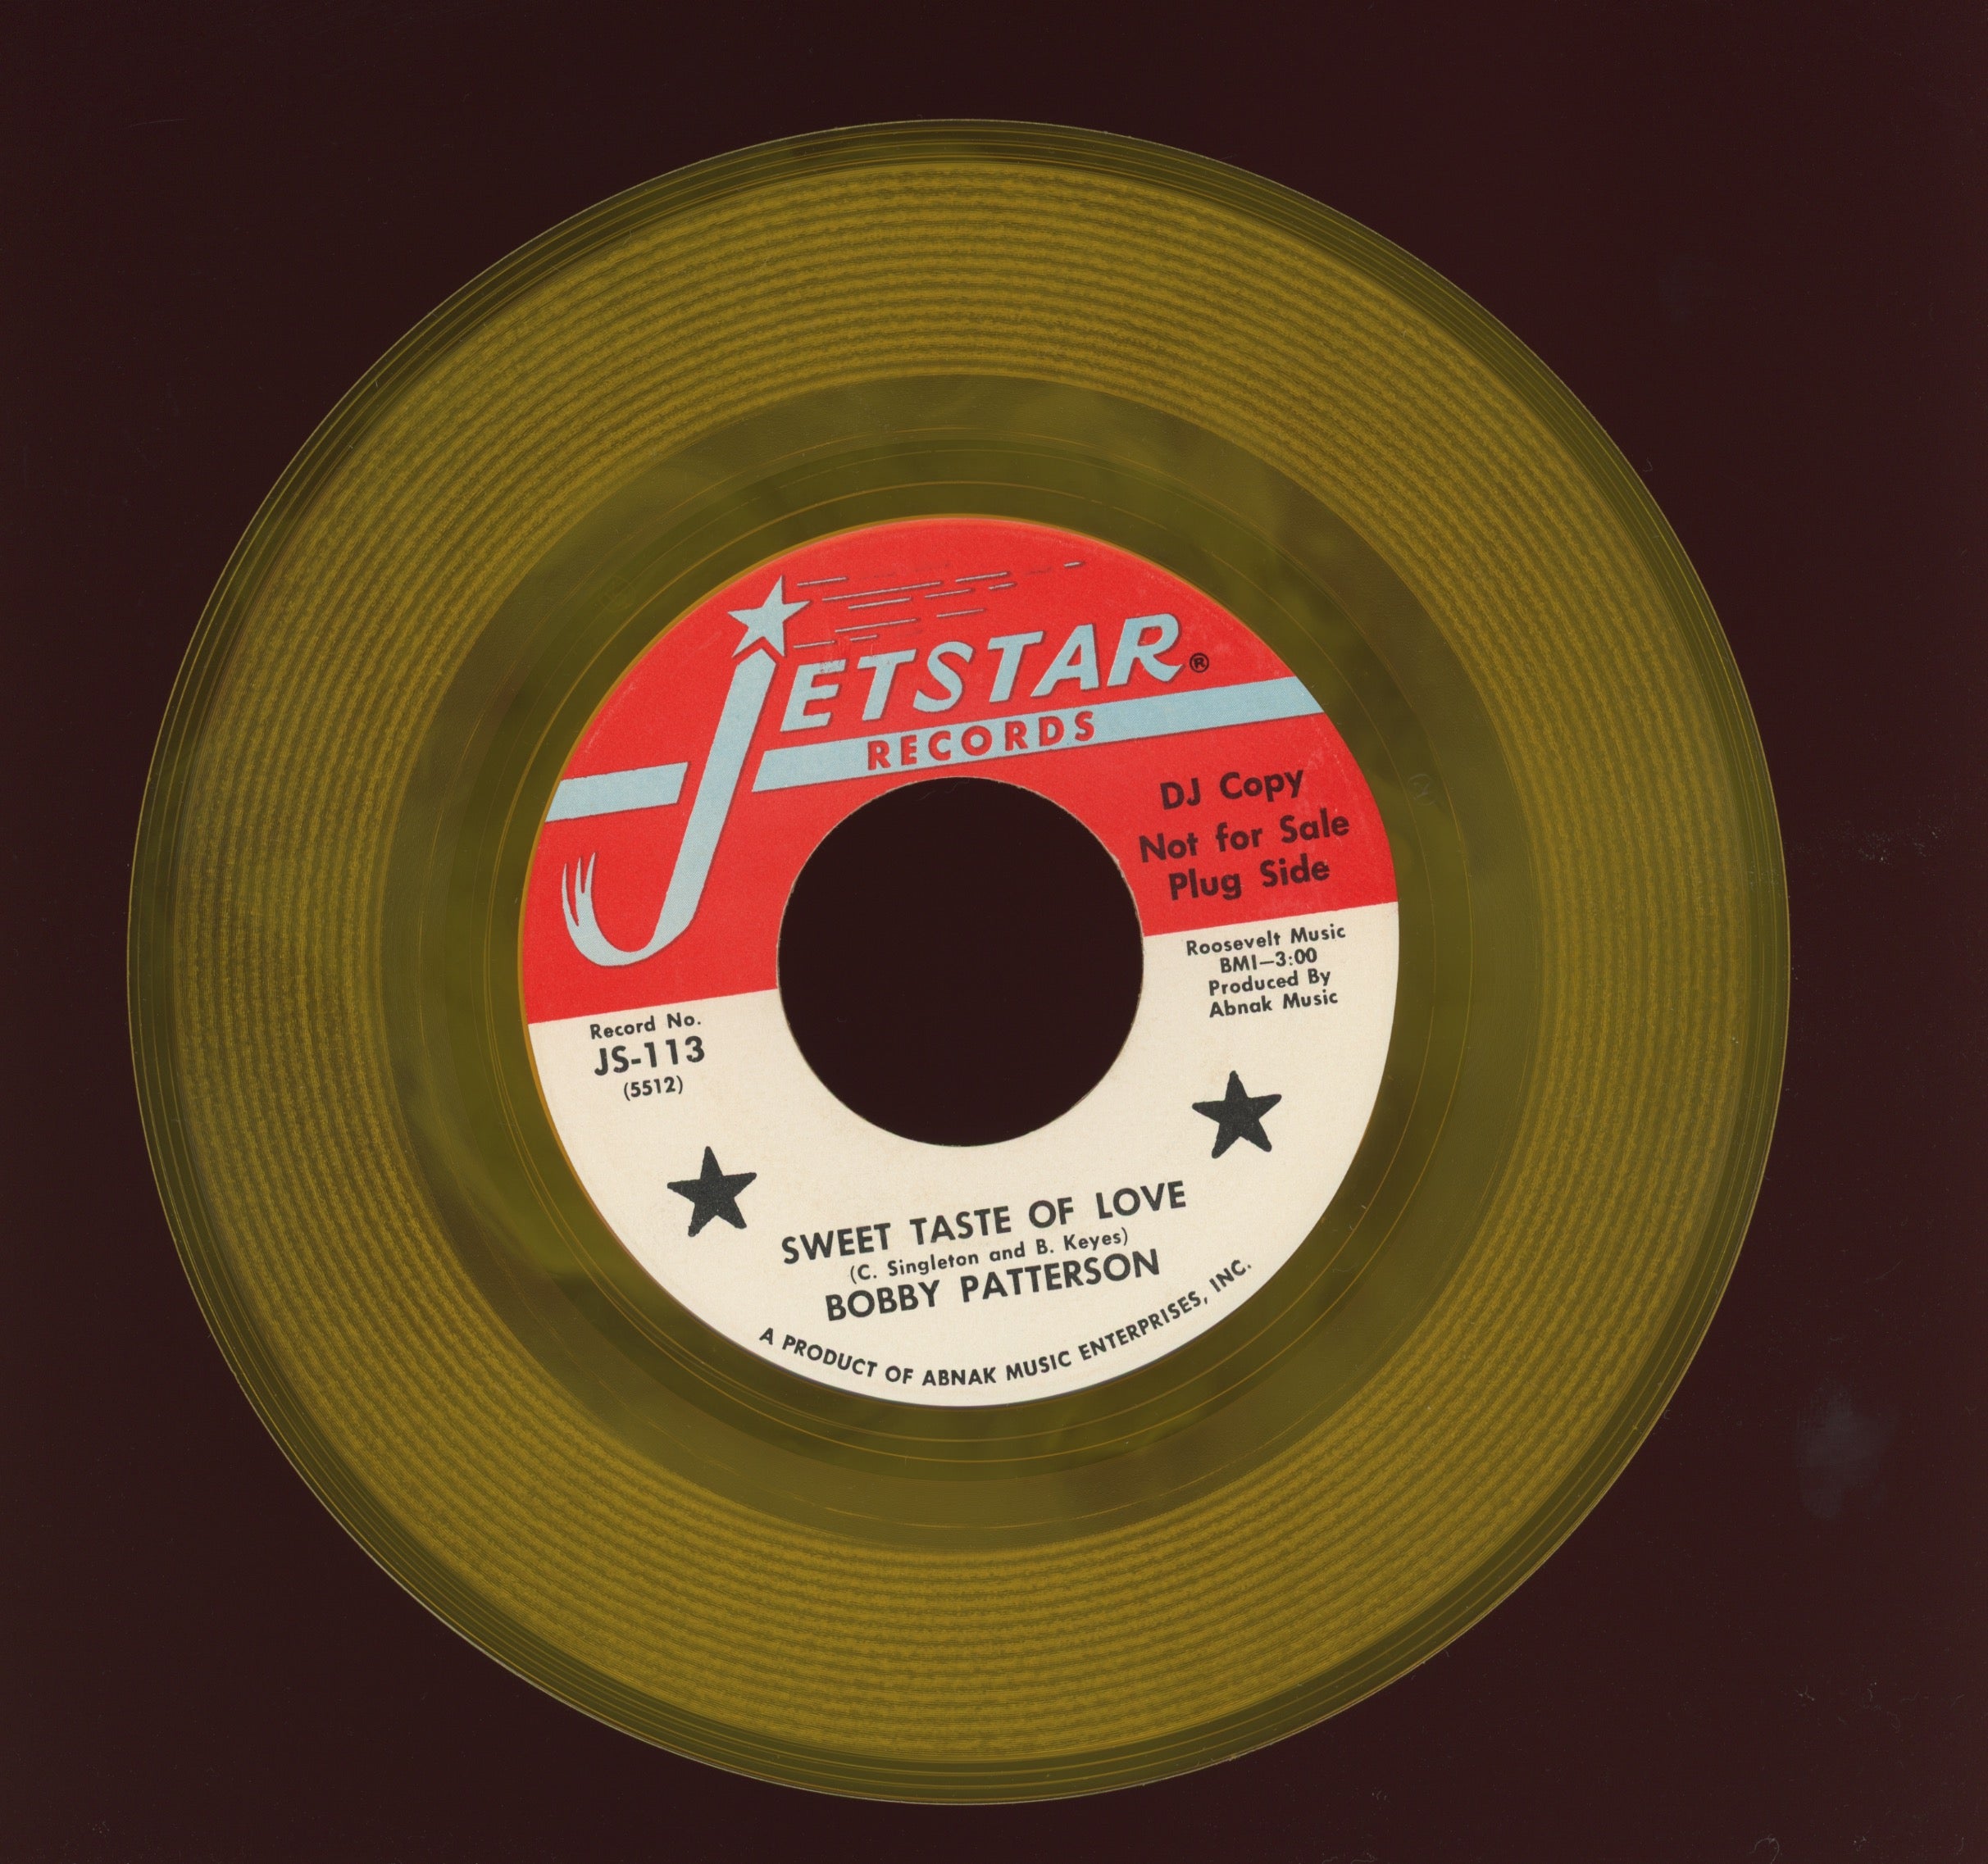 Bobby Patterson - Busy Busy Bee on Jetstar Yellow Vinyl Promo